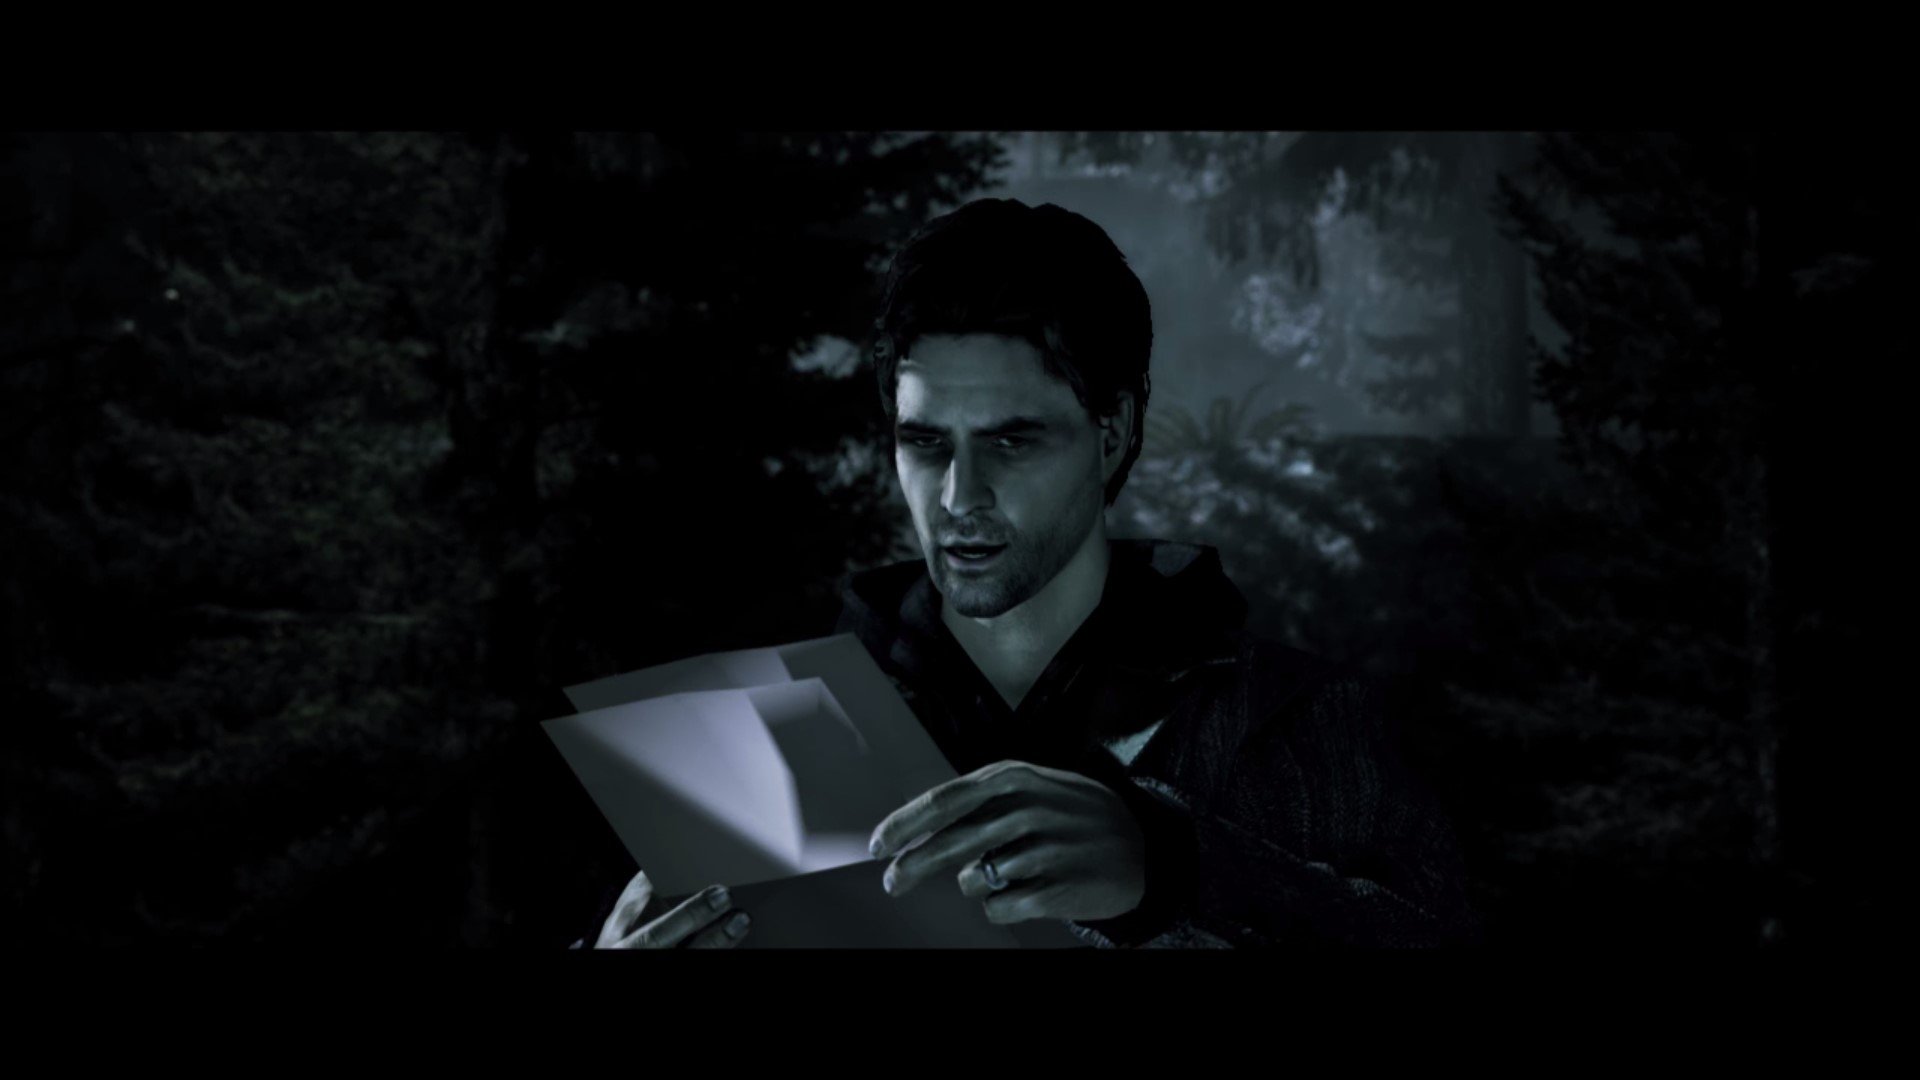 Alan Wake reading manuscript pages in the dark